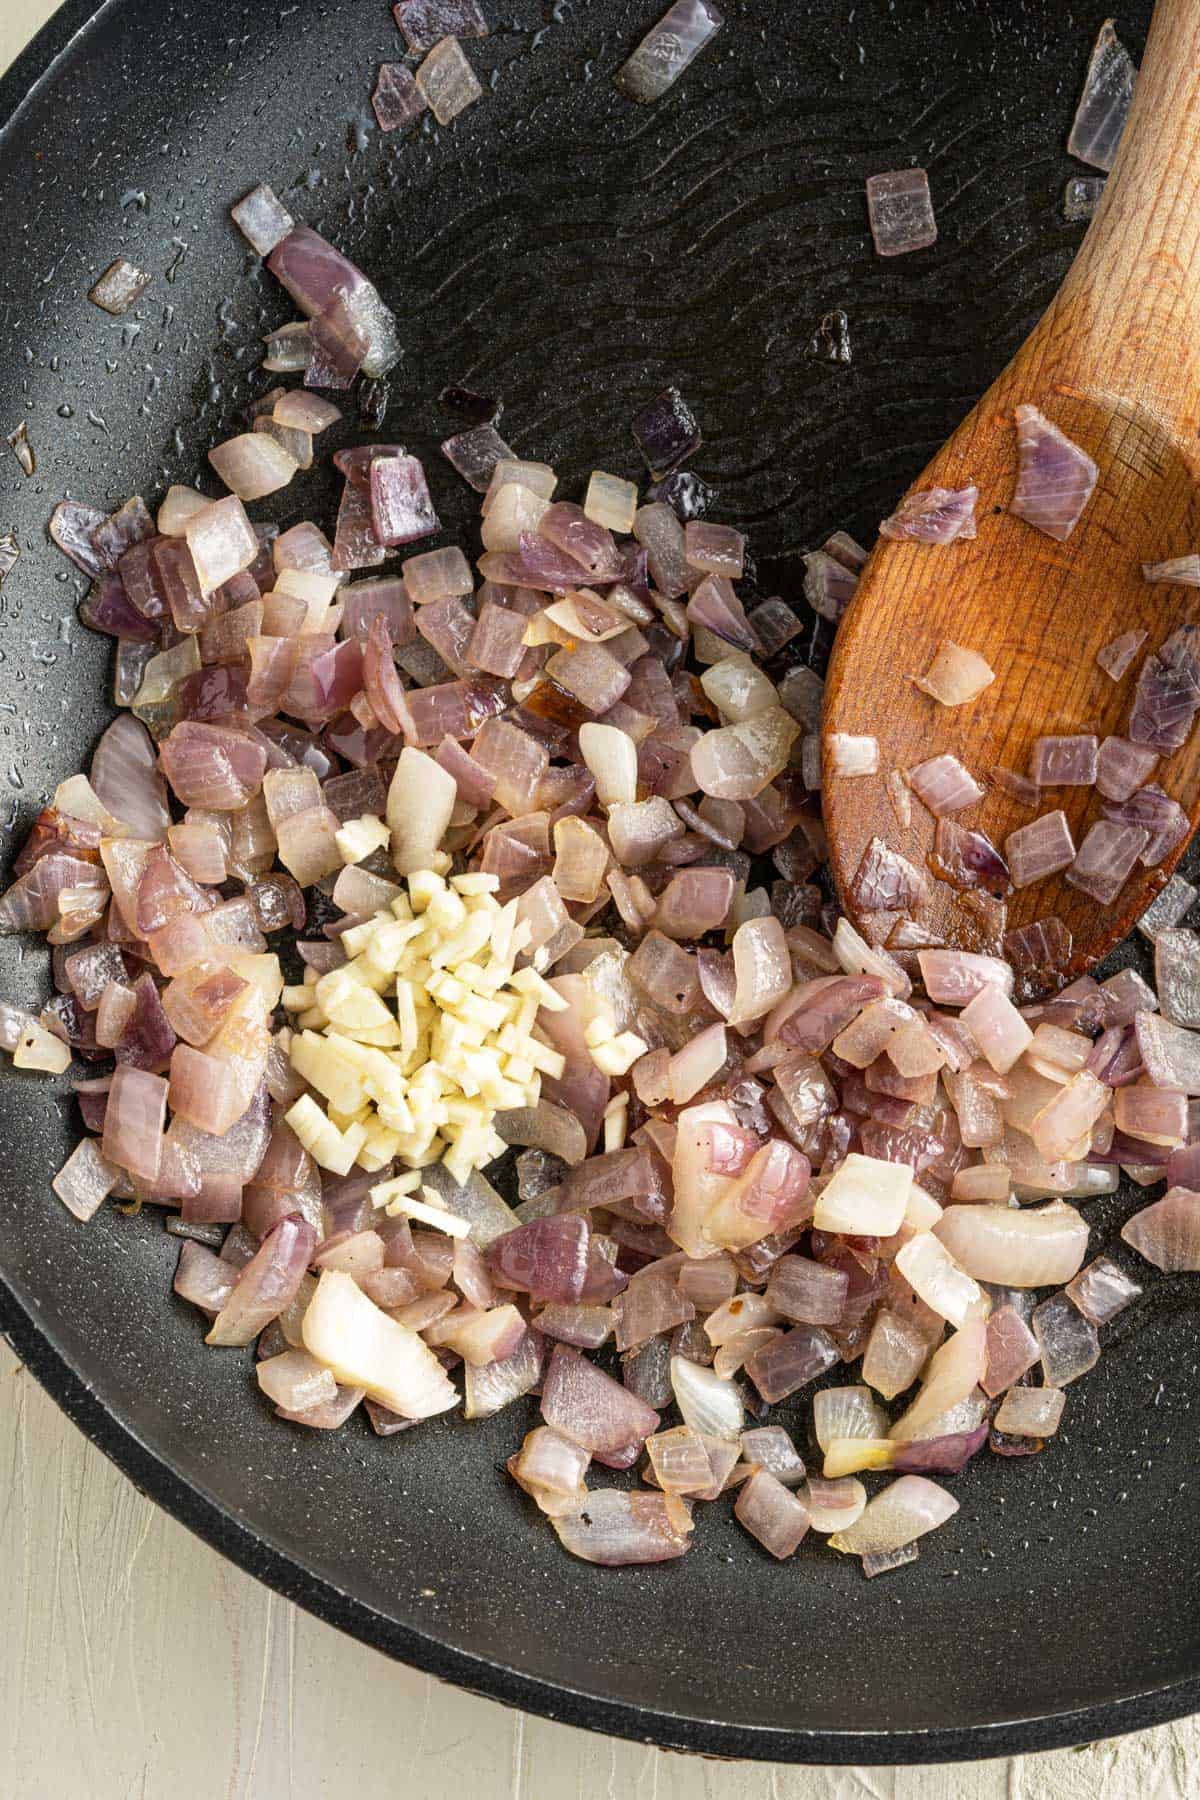 Onions and garlic sauteed in a pan.